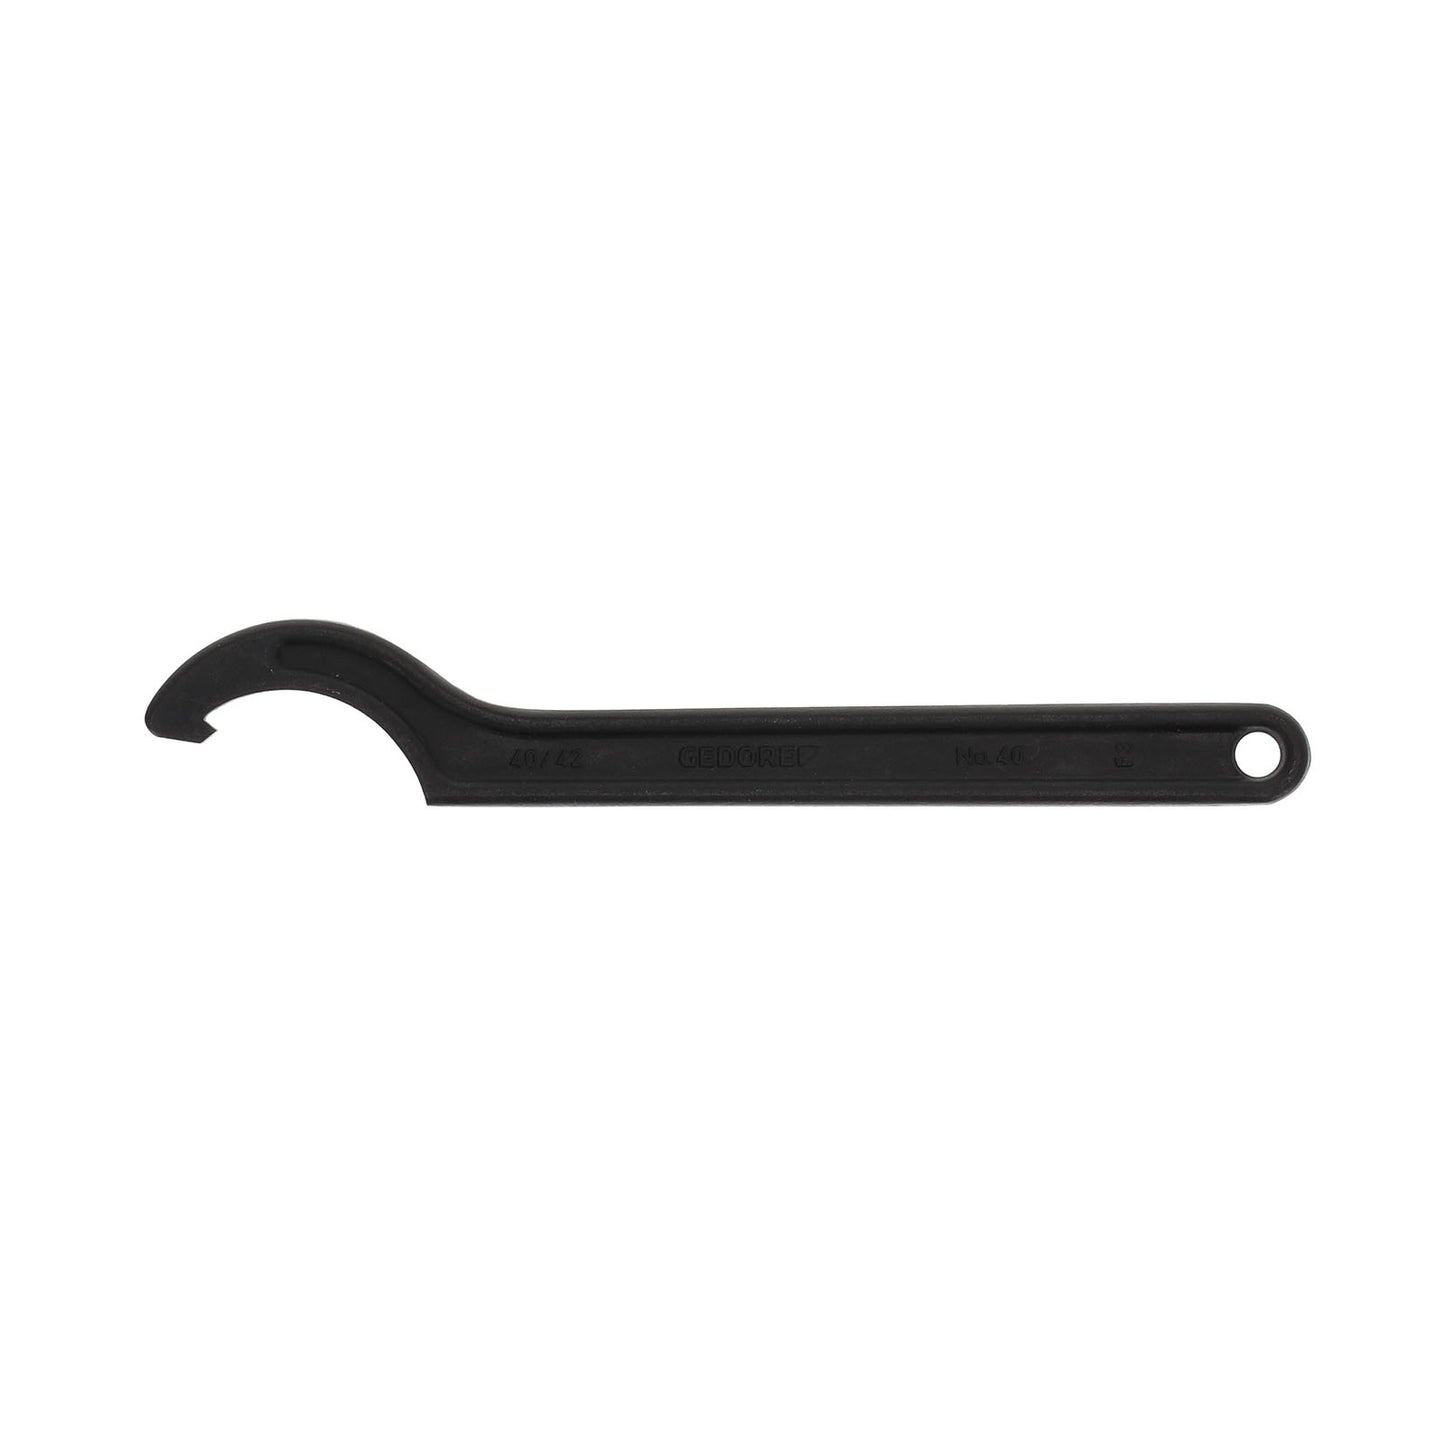 GEDORE 40 40-42 - Hook Wrench, 40-42 (6334370)